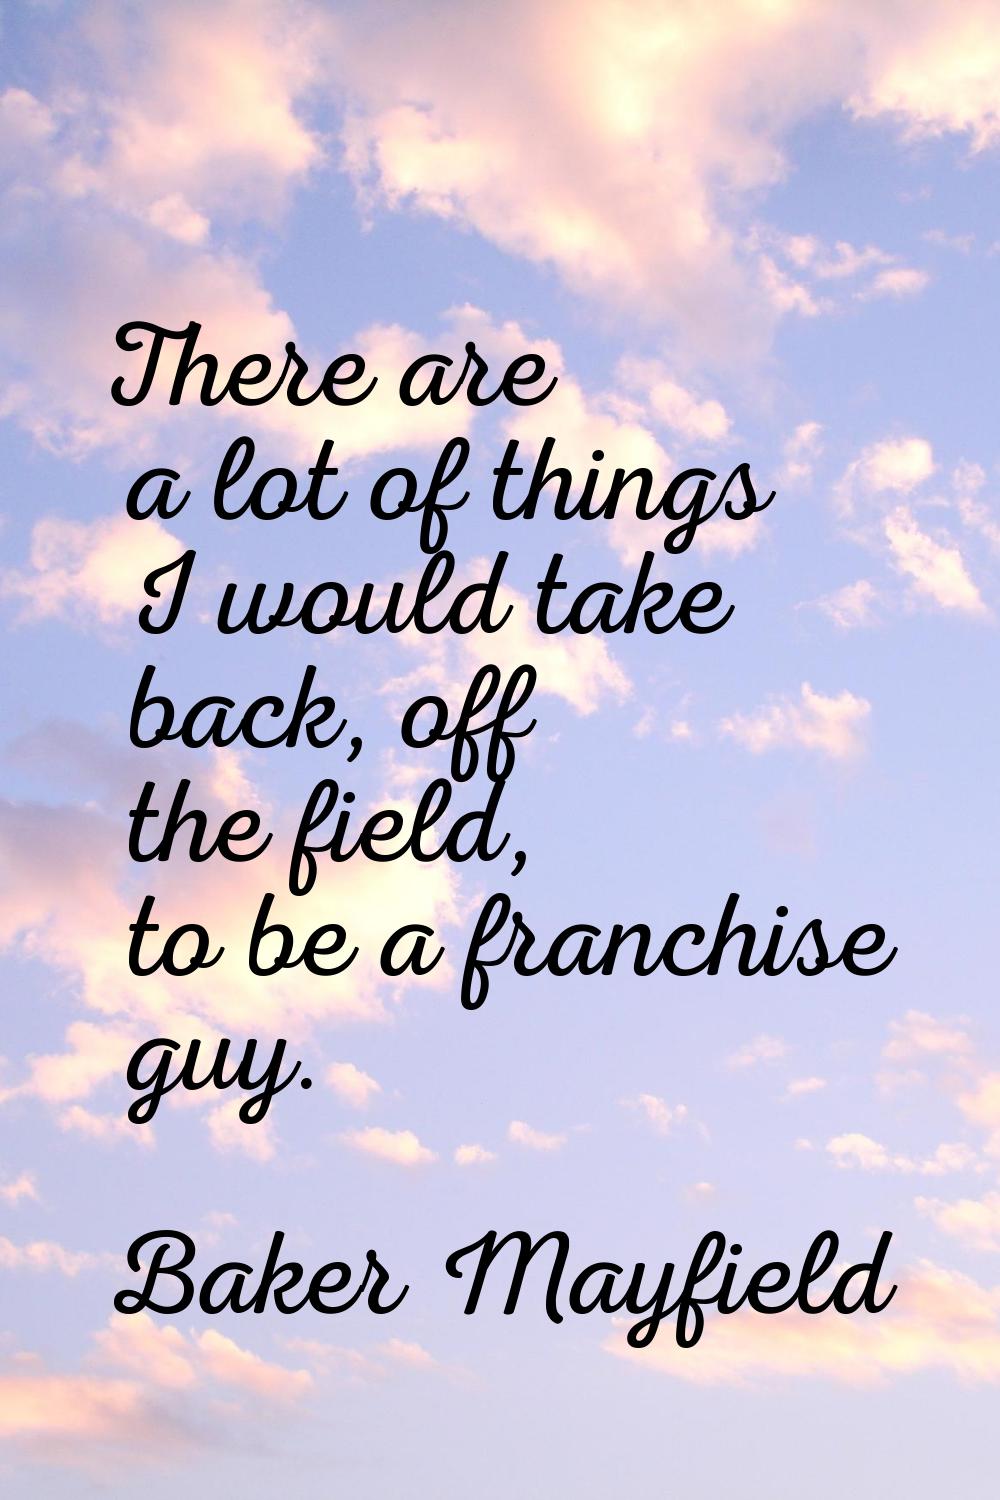 There are a lot of things I would take back, off the field, to be a franchise guy.